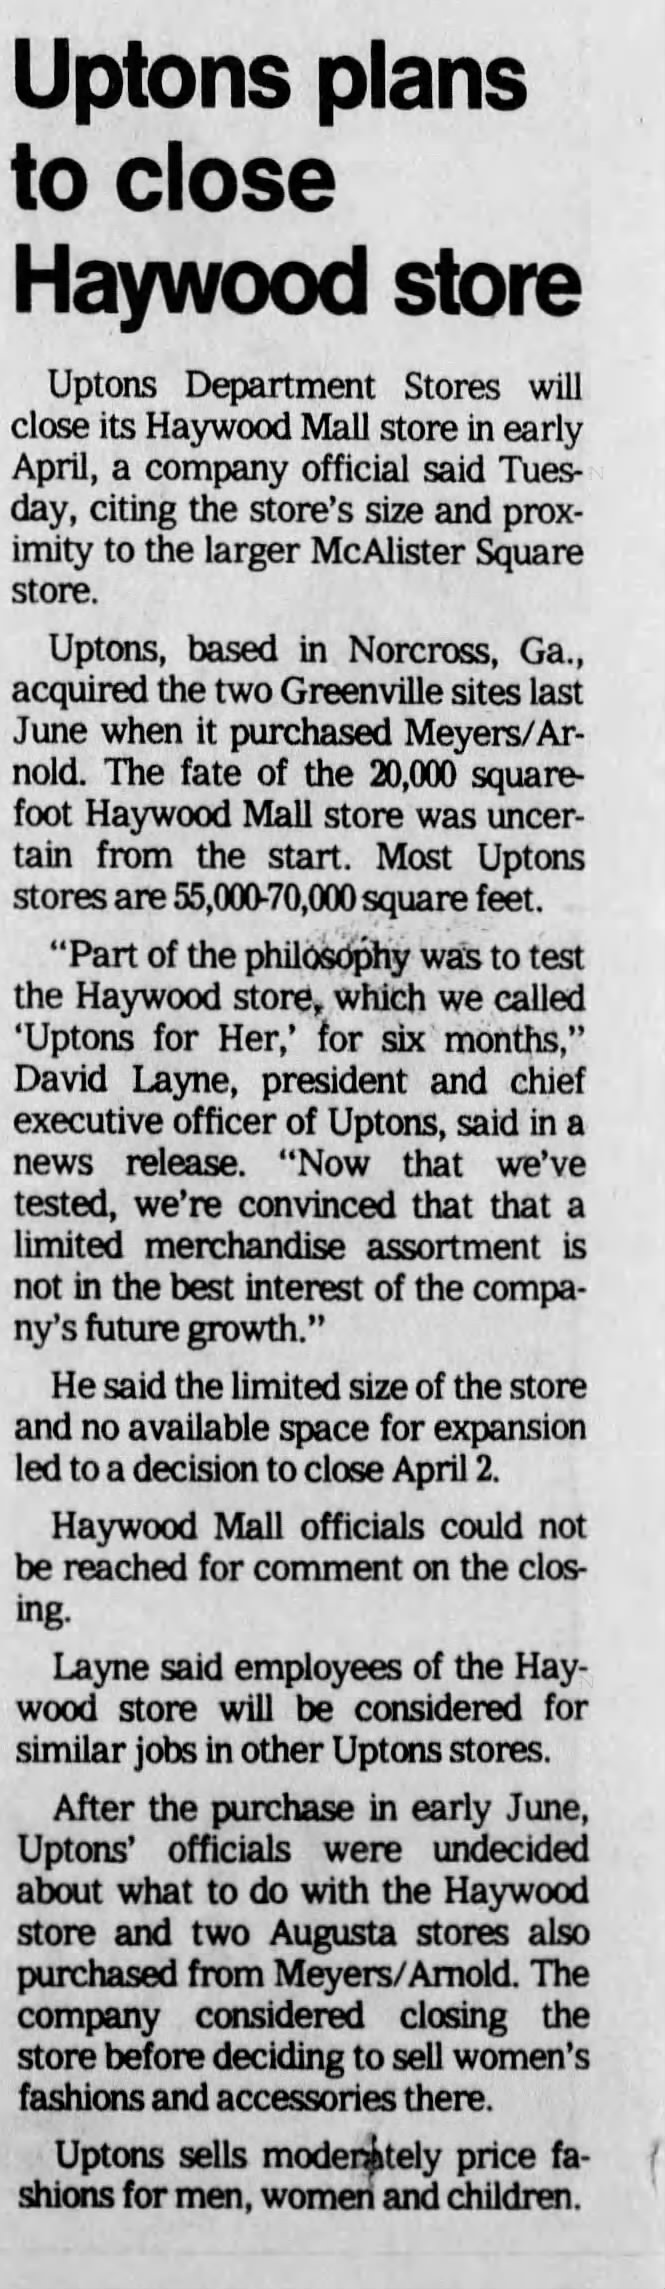 Uptons closes at Haywood March 1988